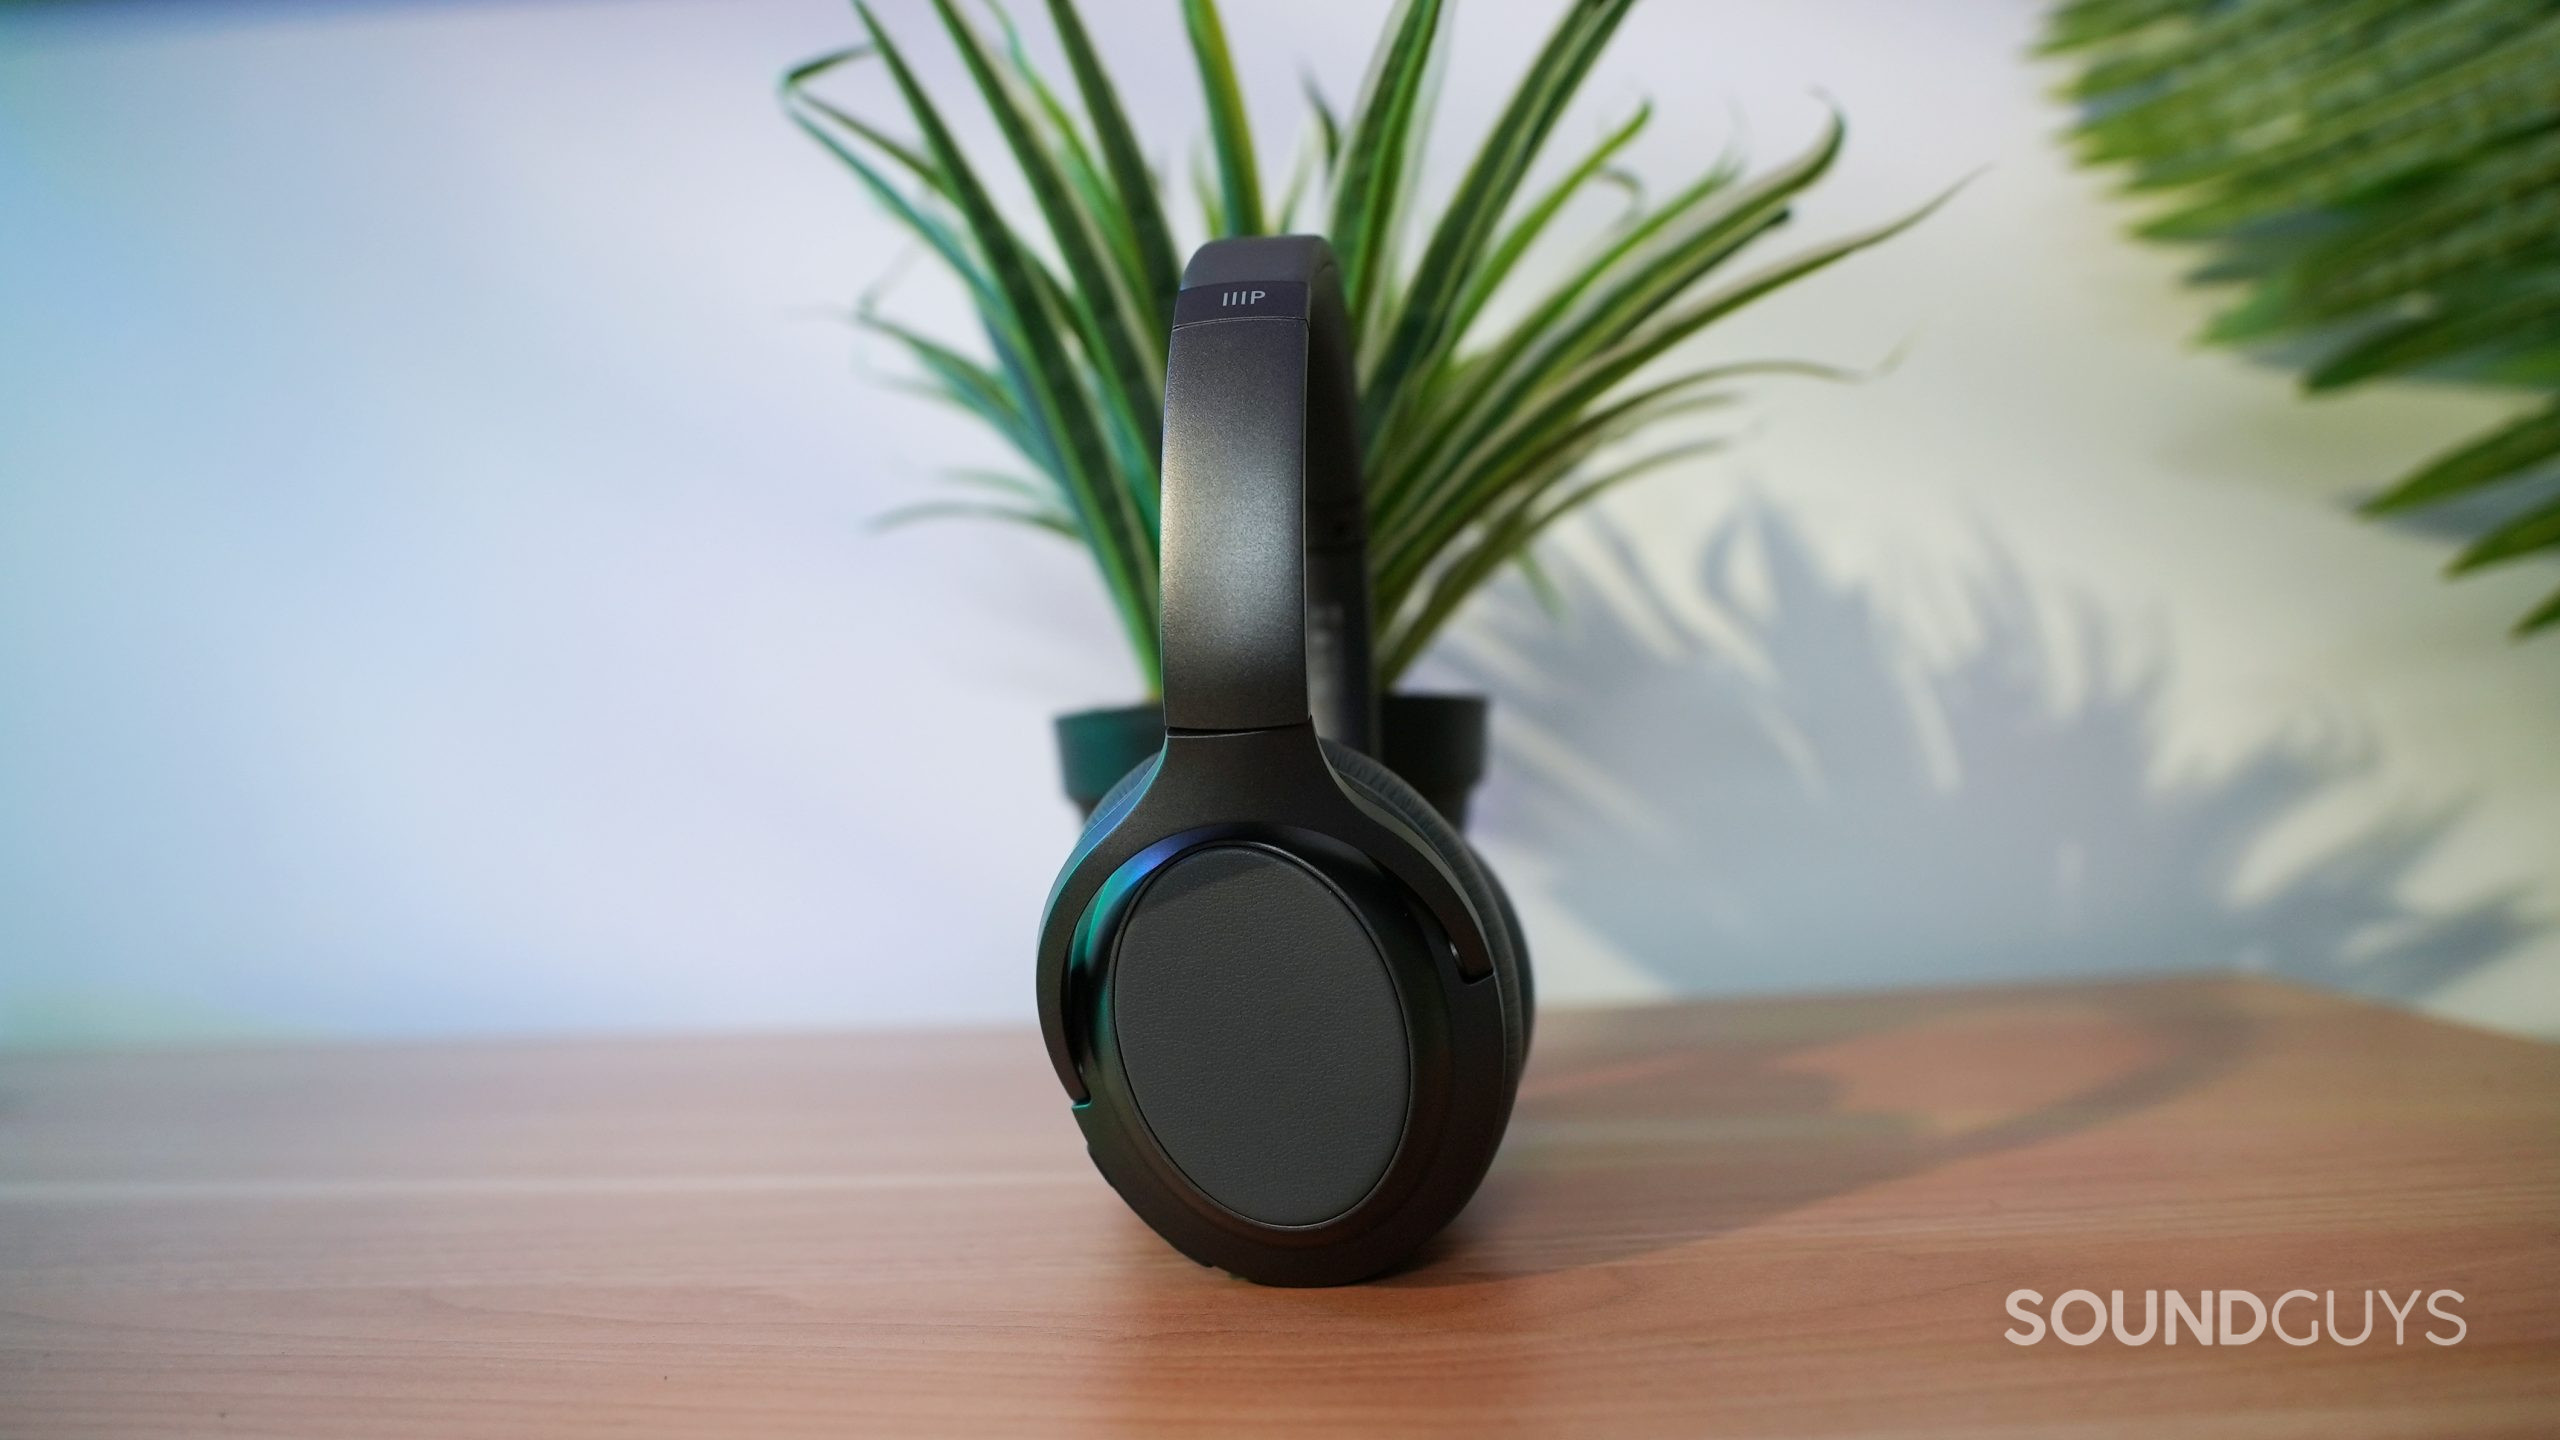 The Monoprice-BT-600 ANC noise canceling Bluetooth headphones in front of a house plant.